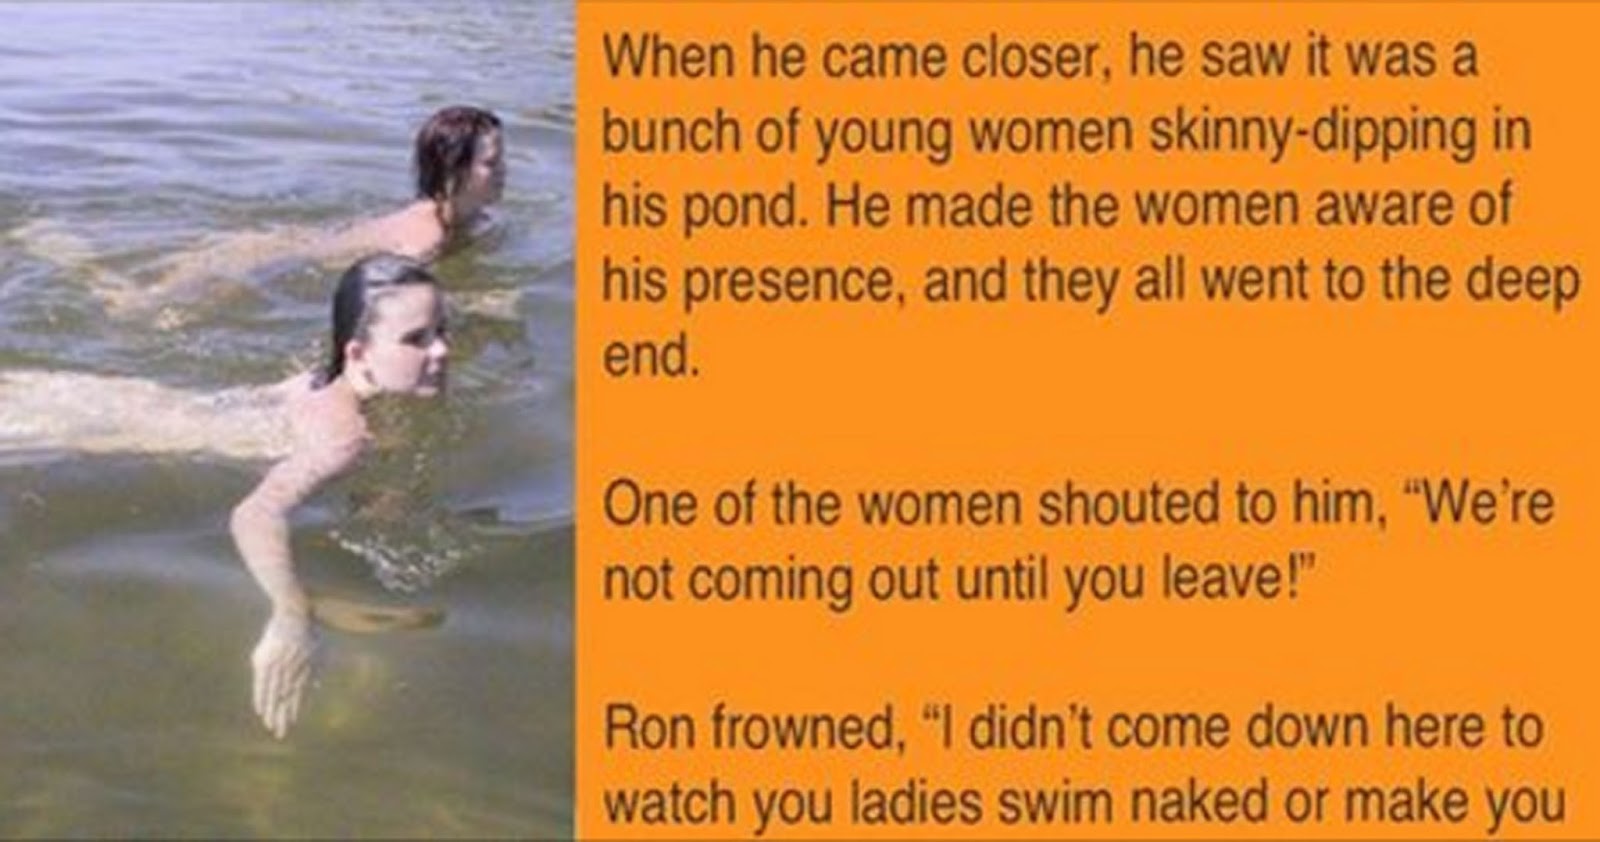 This man caught naked women bathing in his pond. His 